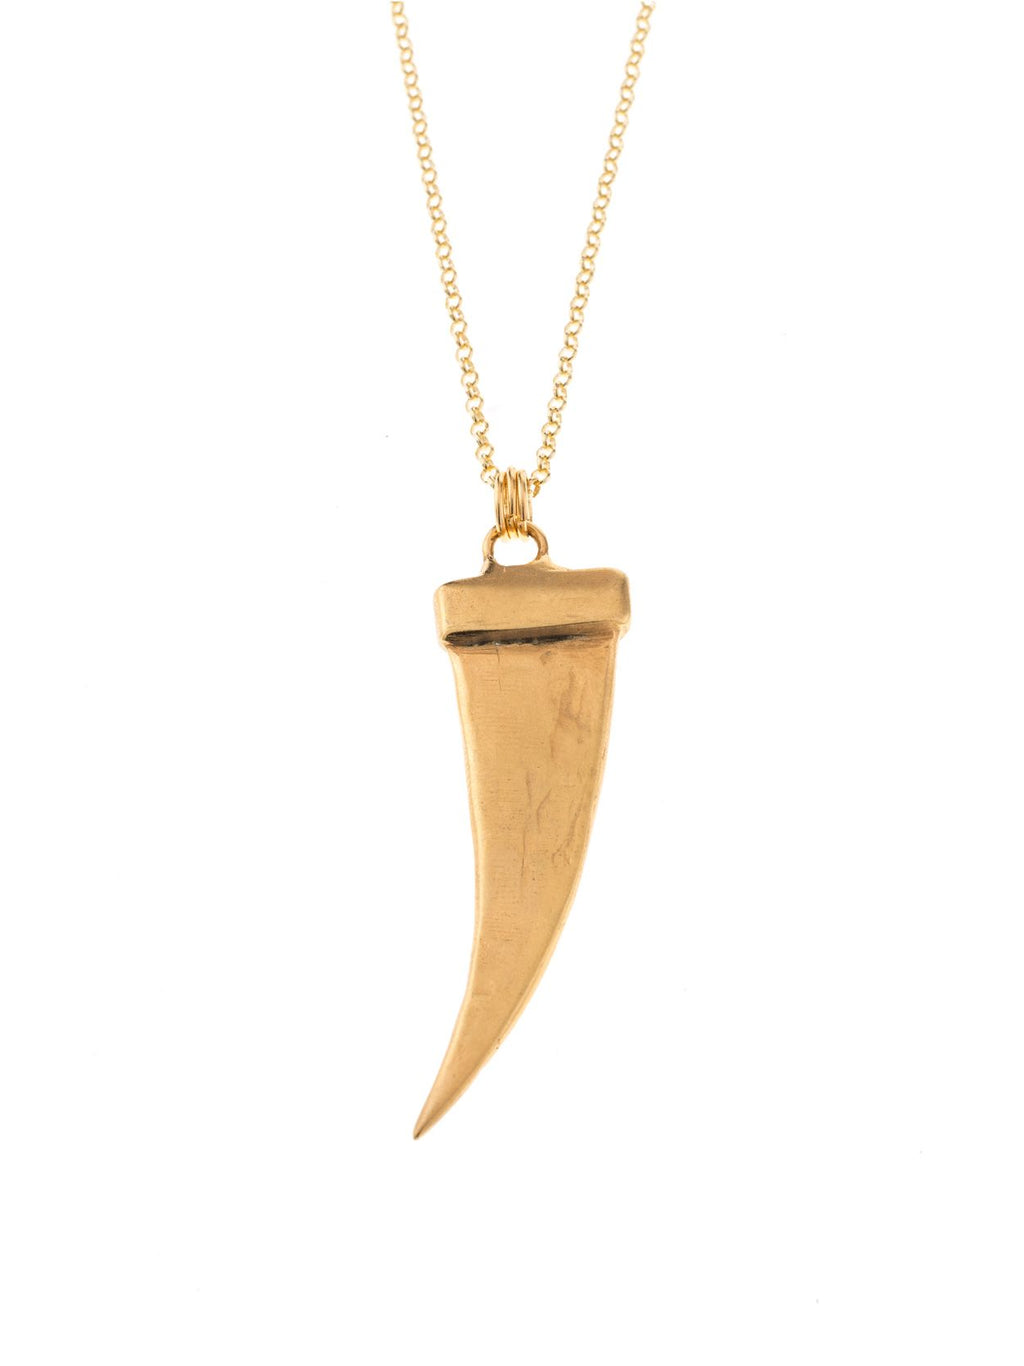 Original necklace for woman with golden flat tusk